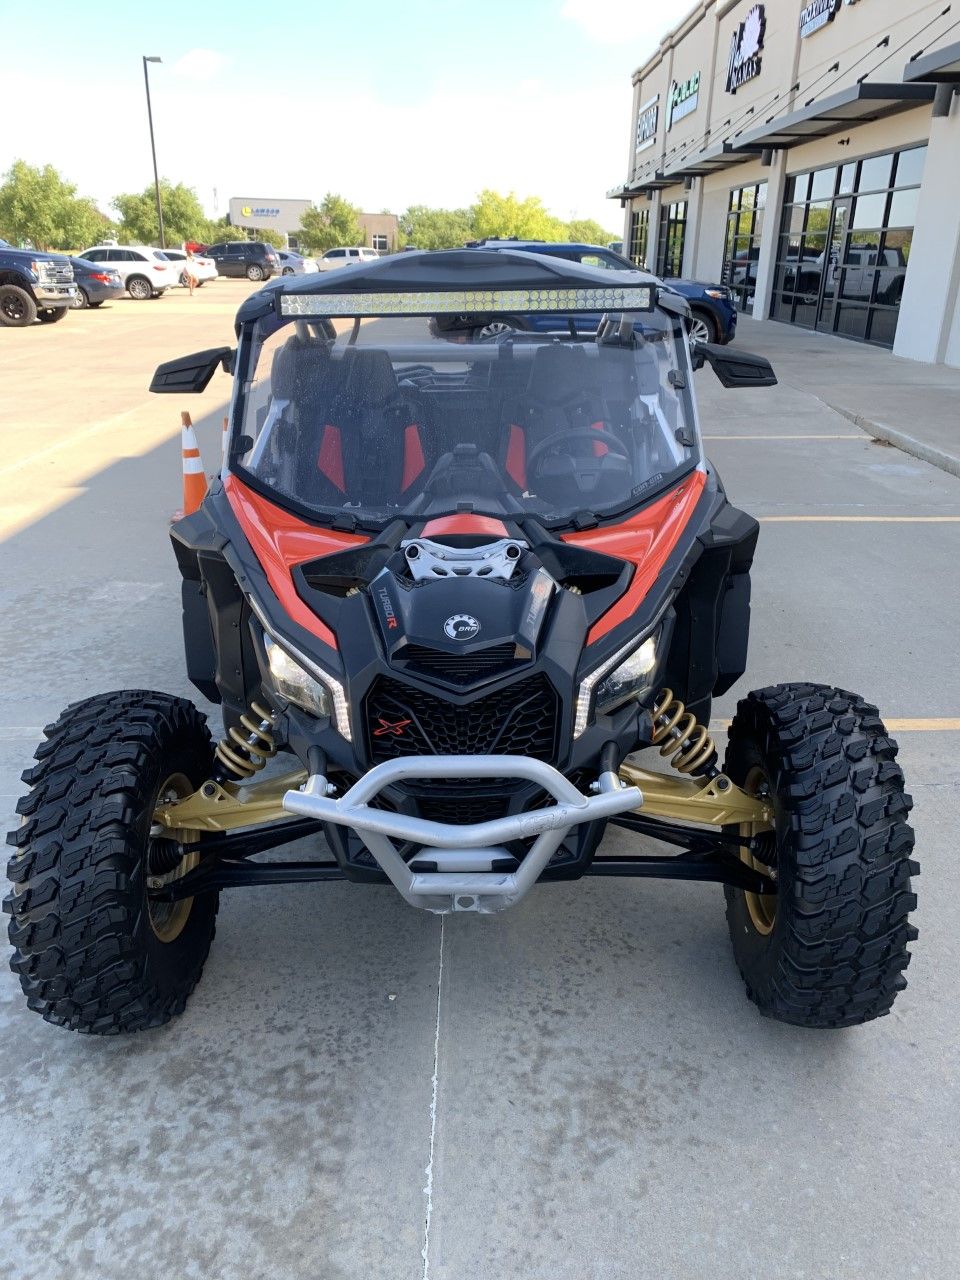 2019 Can-Am Maverick X3 X rs Turbo R in Norman, Oklahoma - Photo 3